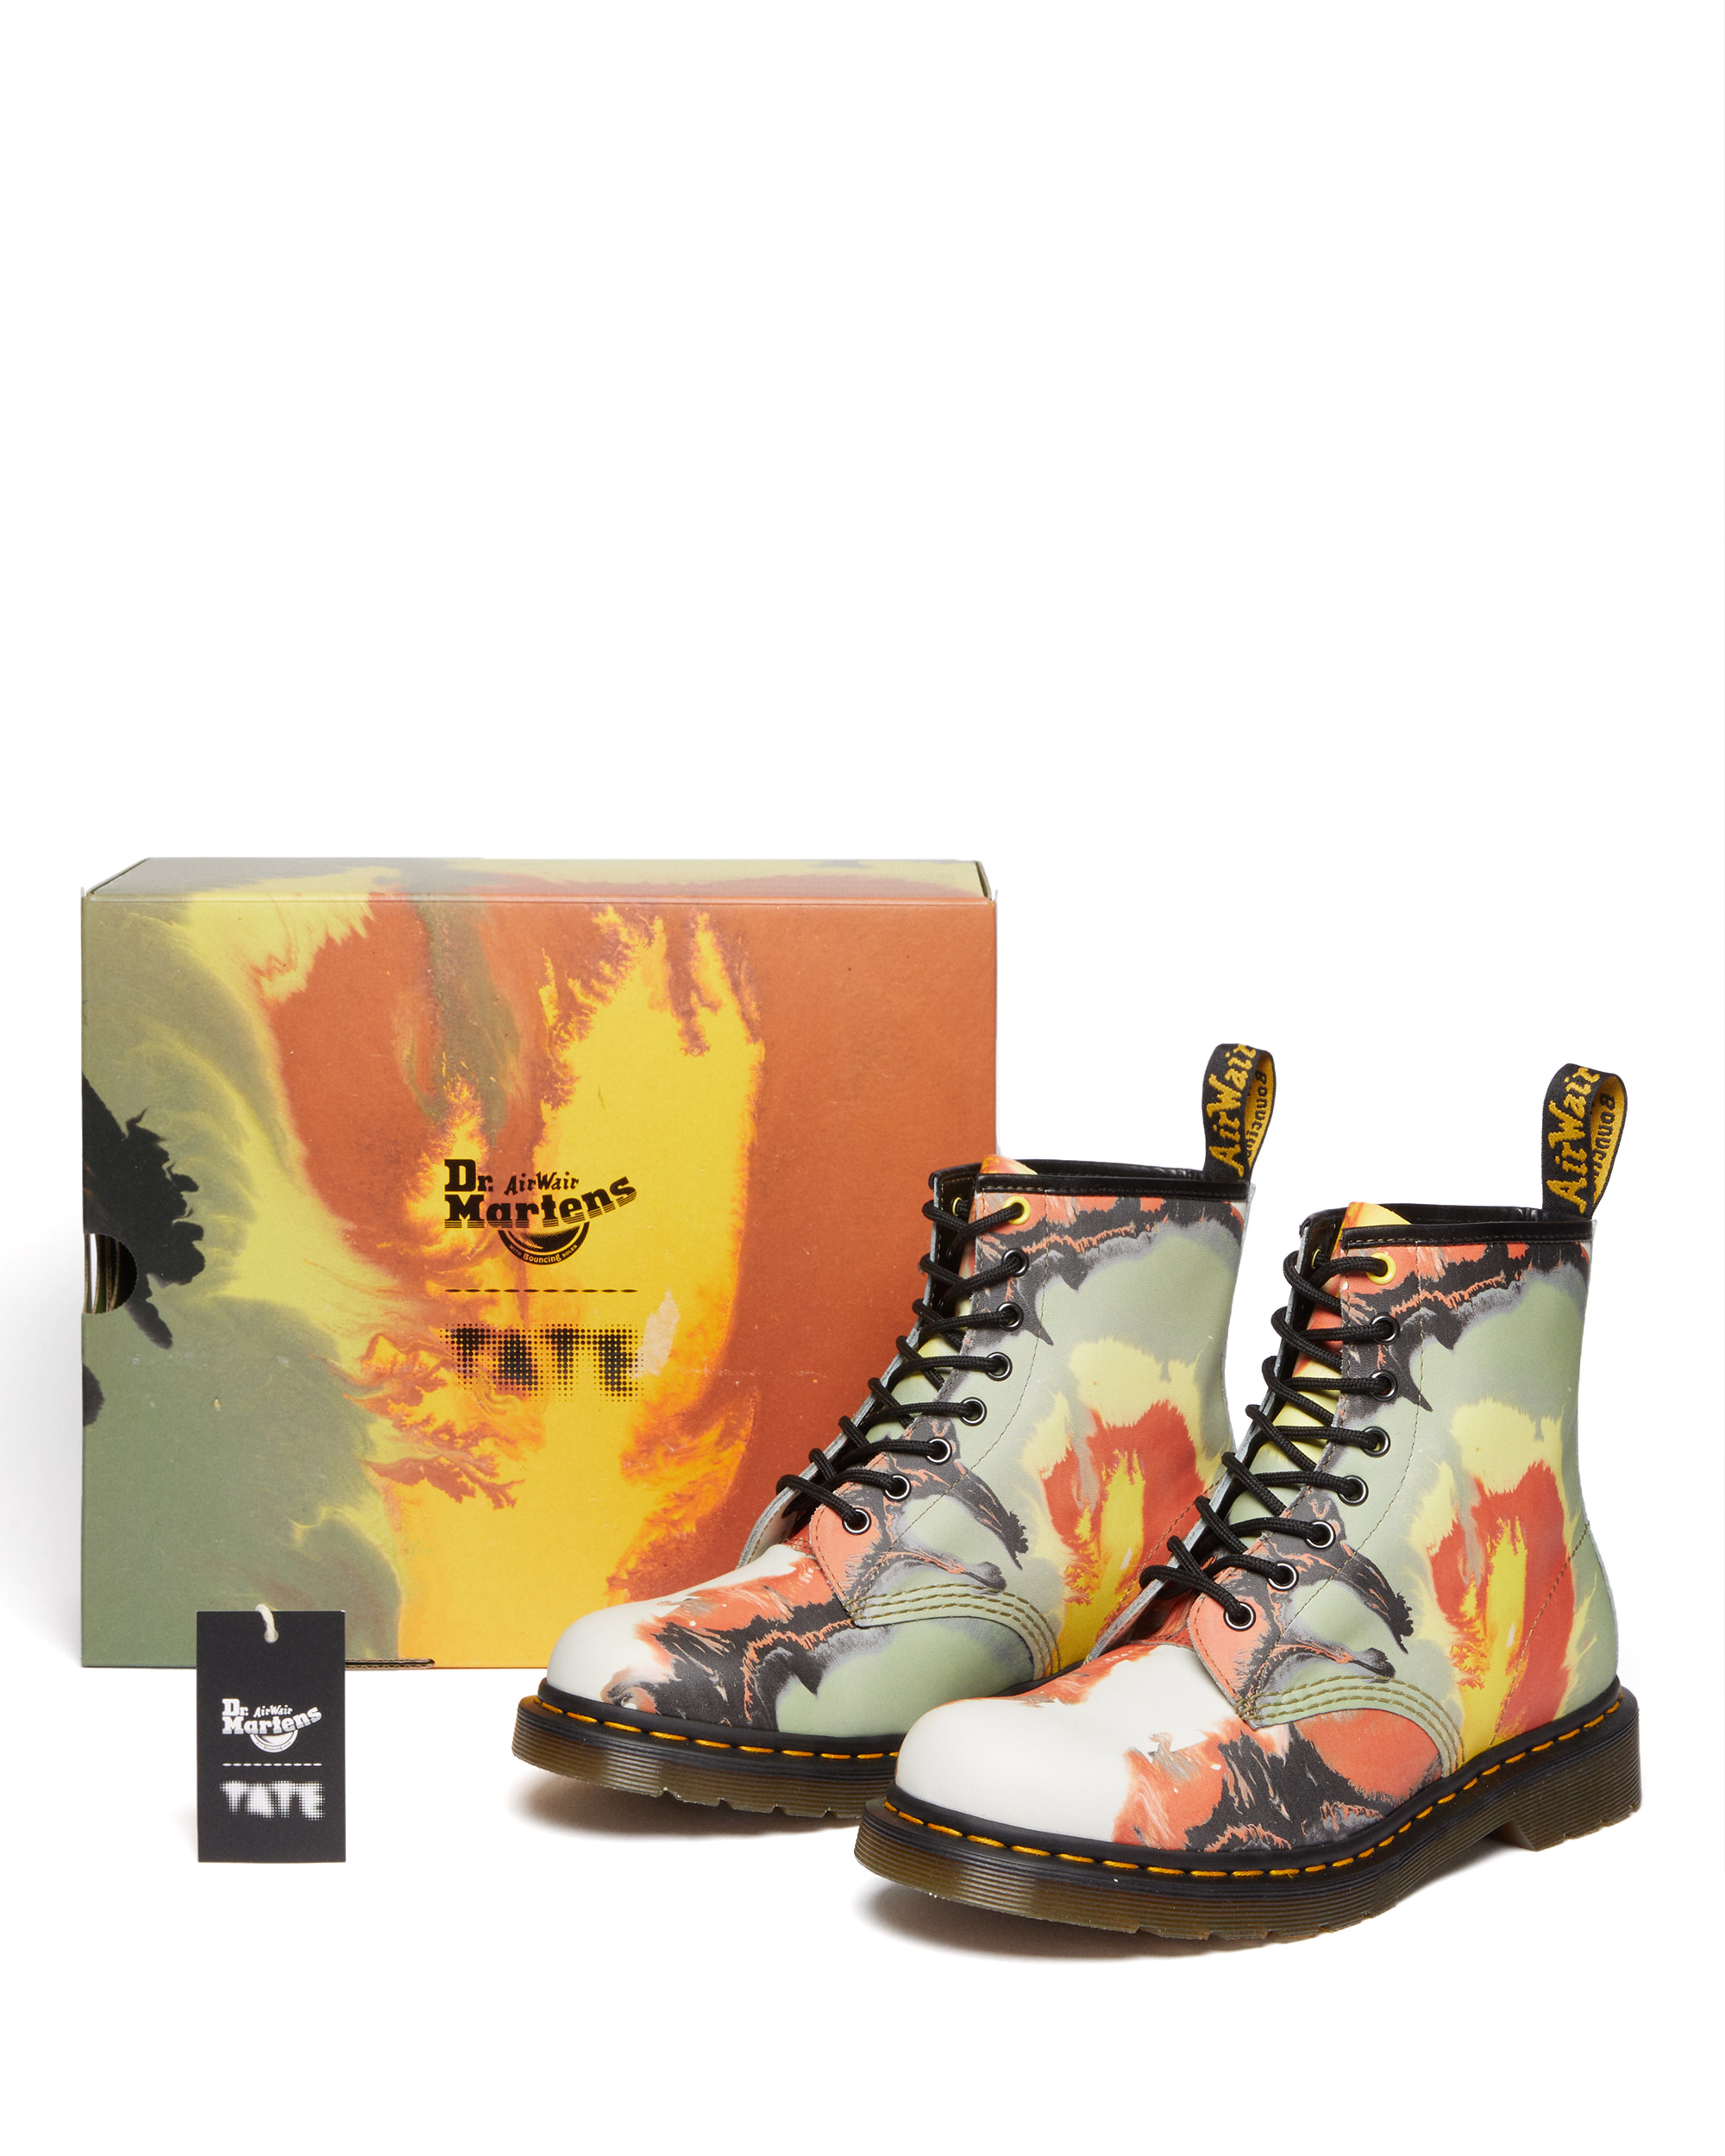 Dr. Martens x Tate: an ode to surrealism by Ithell Colquhoun - HIGHXTAR.